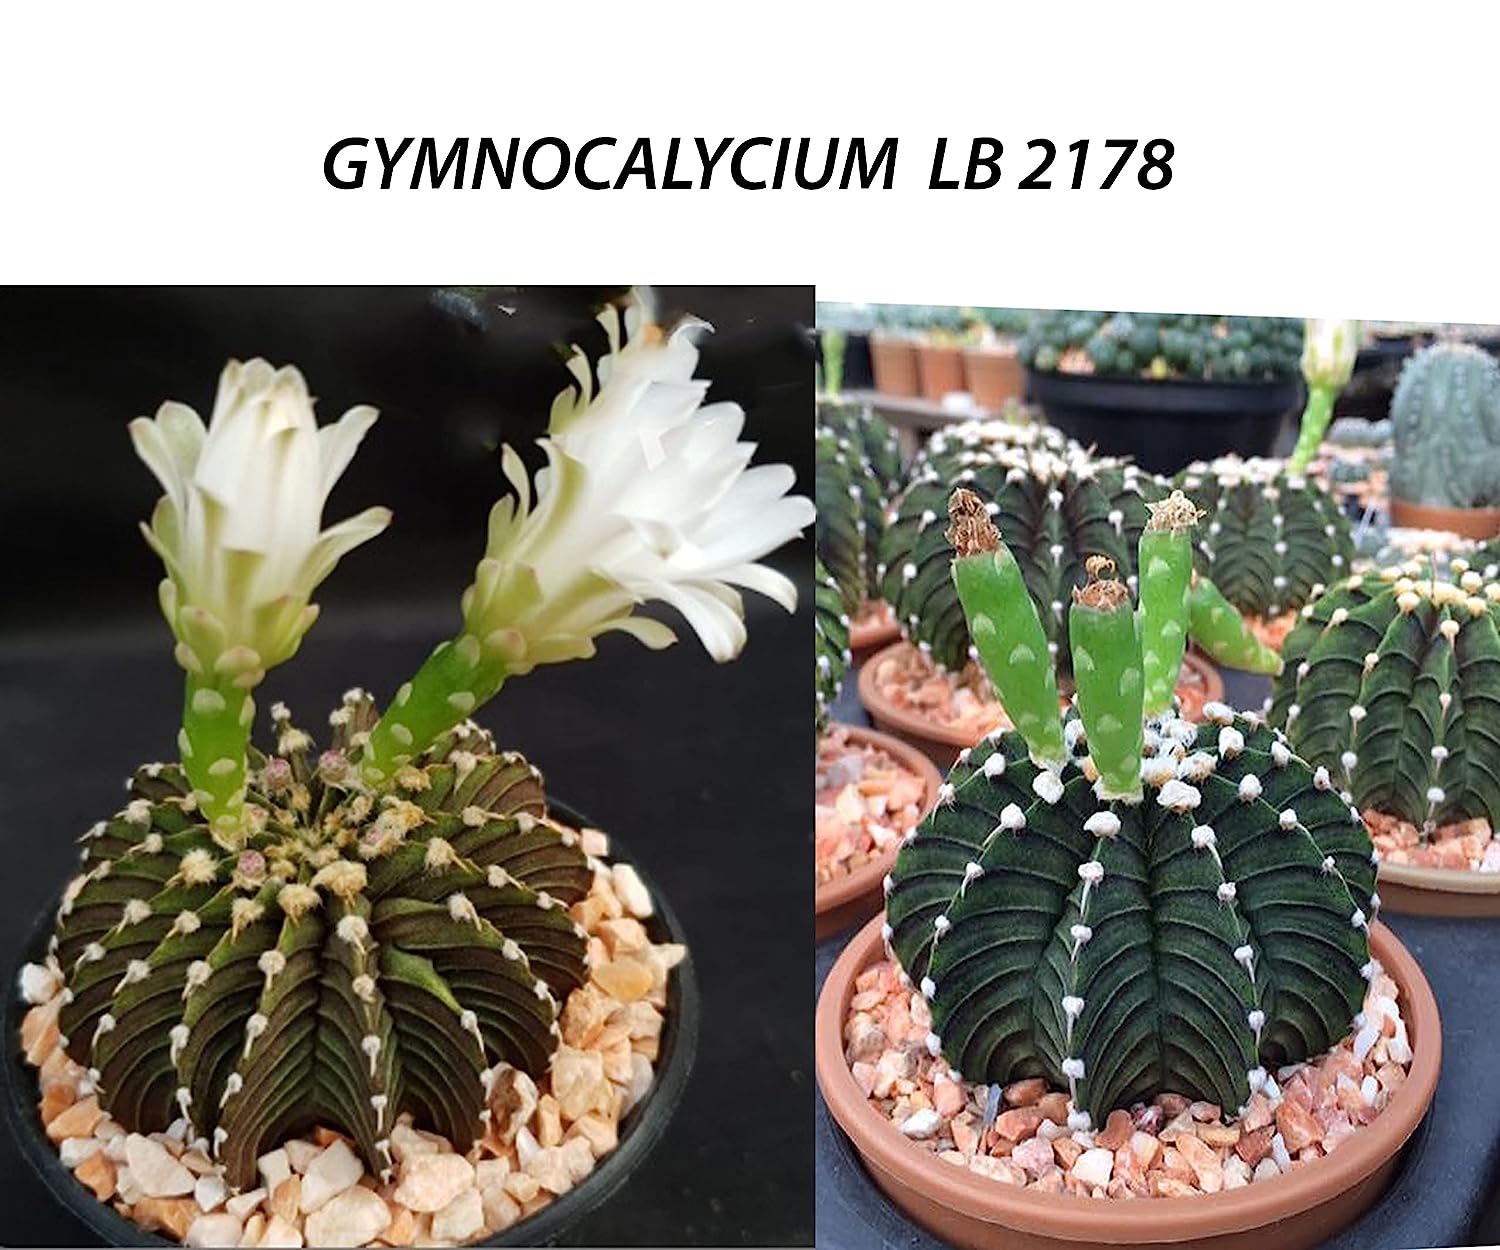 Gymnocalycium friedrichii LB 2178 Agua dulce rare Cactus Live Plant Size 3.5 inches Blooming Size